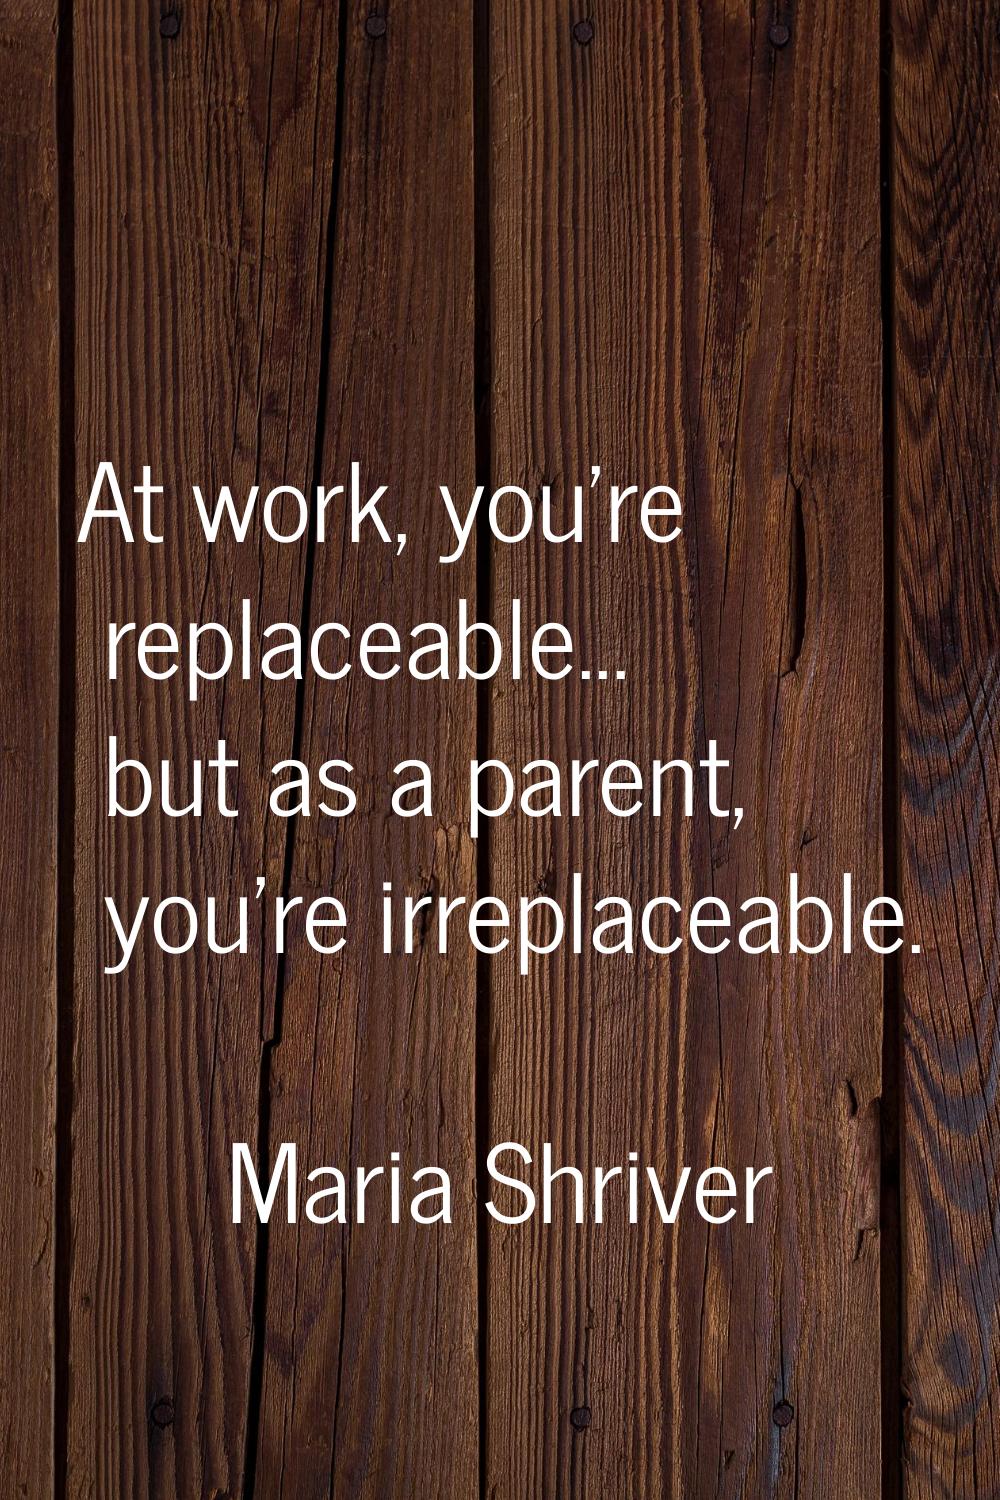 At work, you're replaceable... but as a parent, you're irreplaceable.